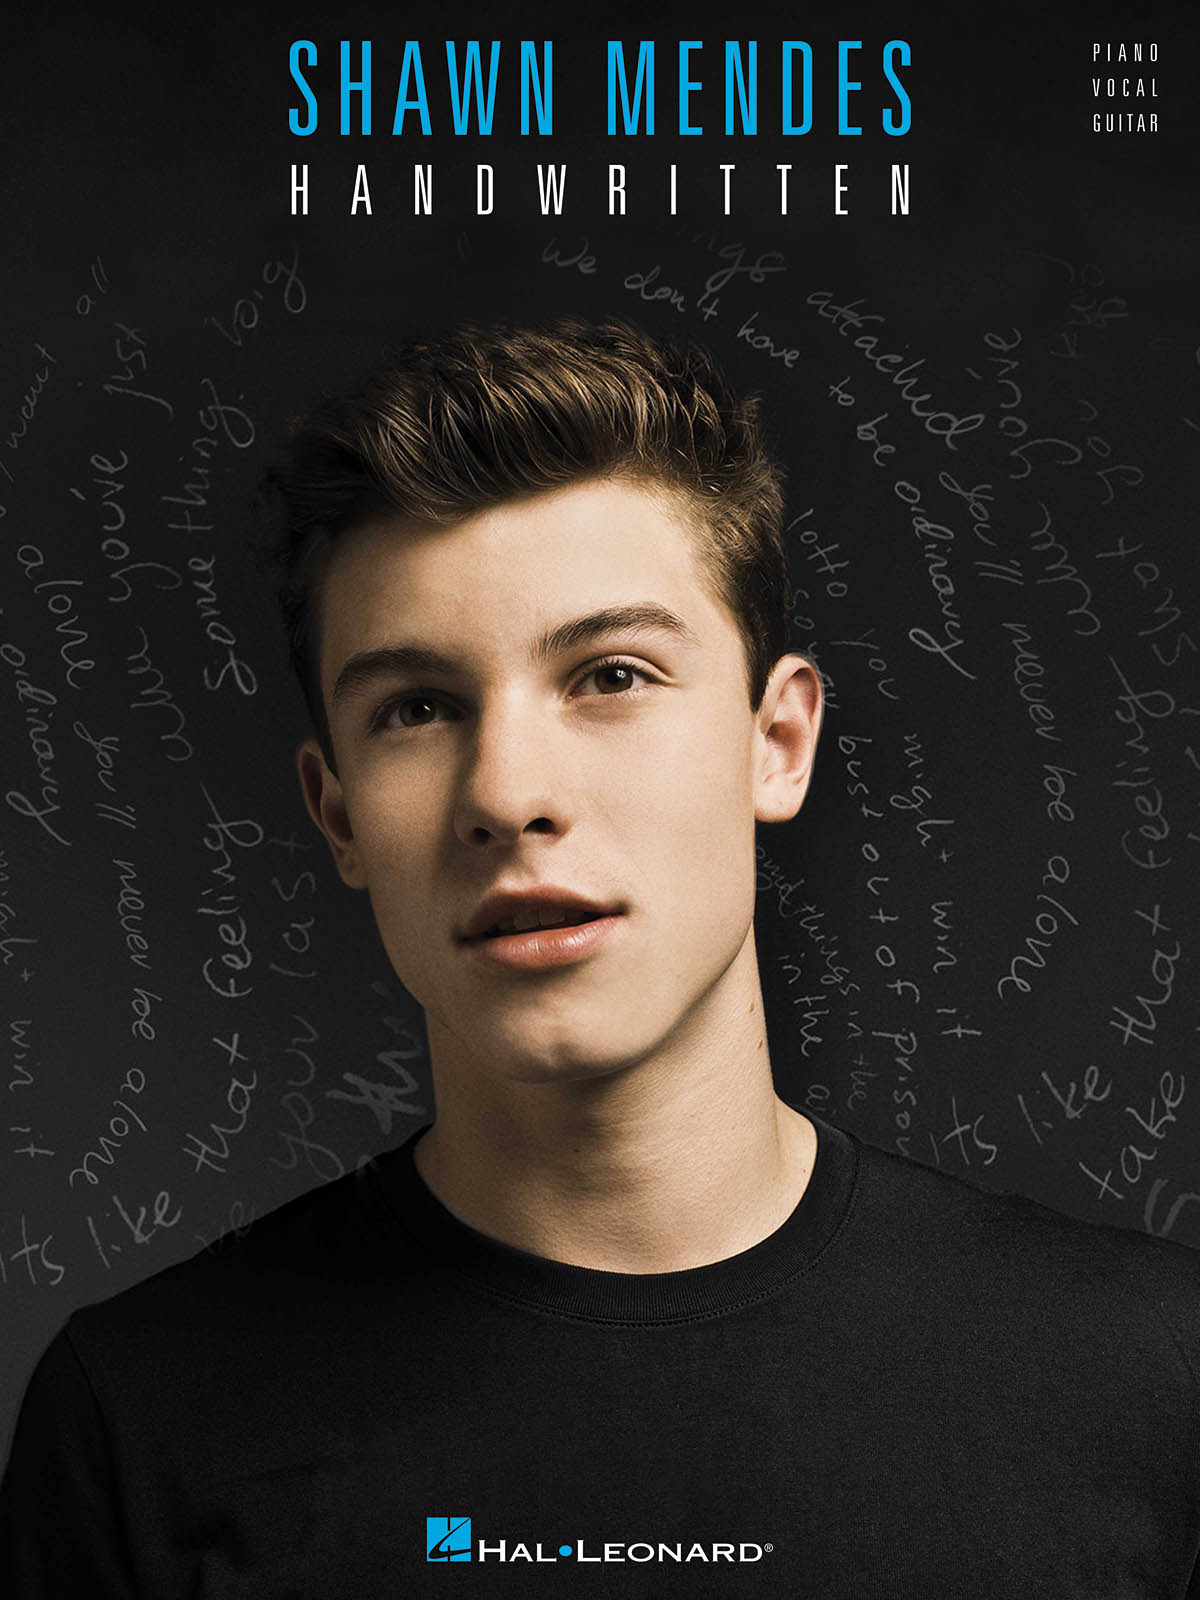 Shawn Mendes: Shawn Mendes - Handwritten: Piano  Vocal and Guitar: Album